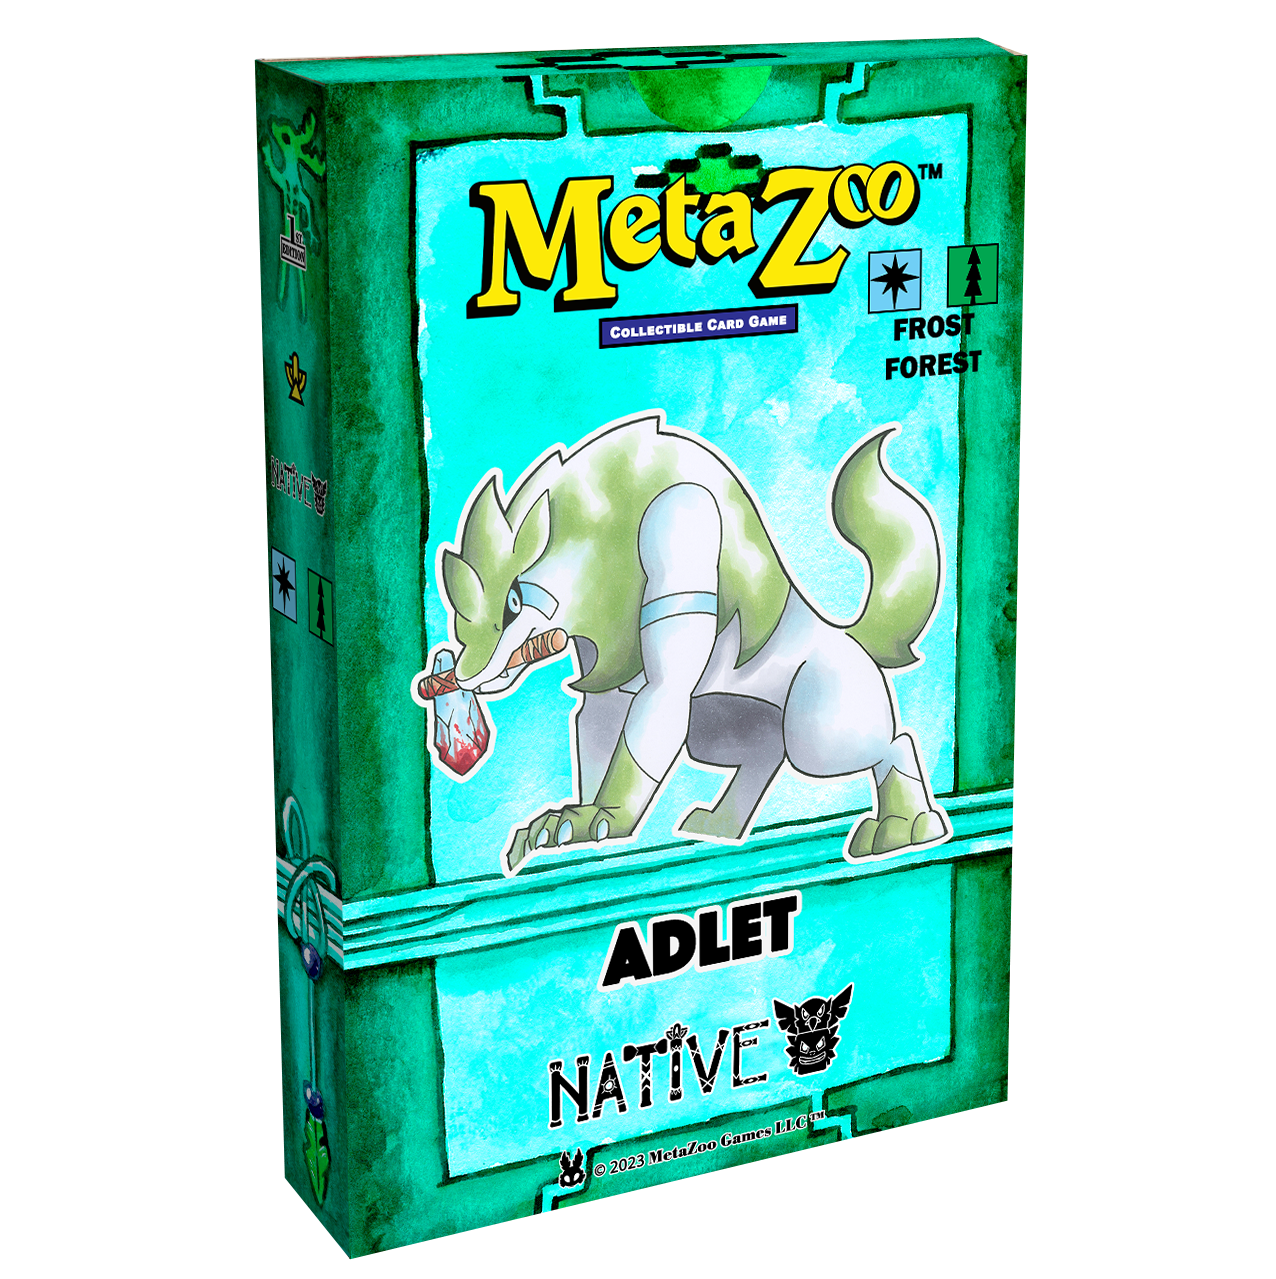 MetaZoo: Cryptid Nations - Native - 1st Edition Themed Deck - Adlet